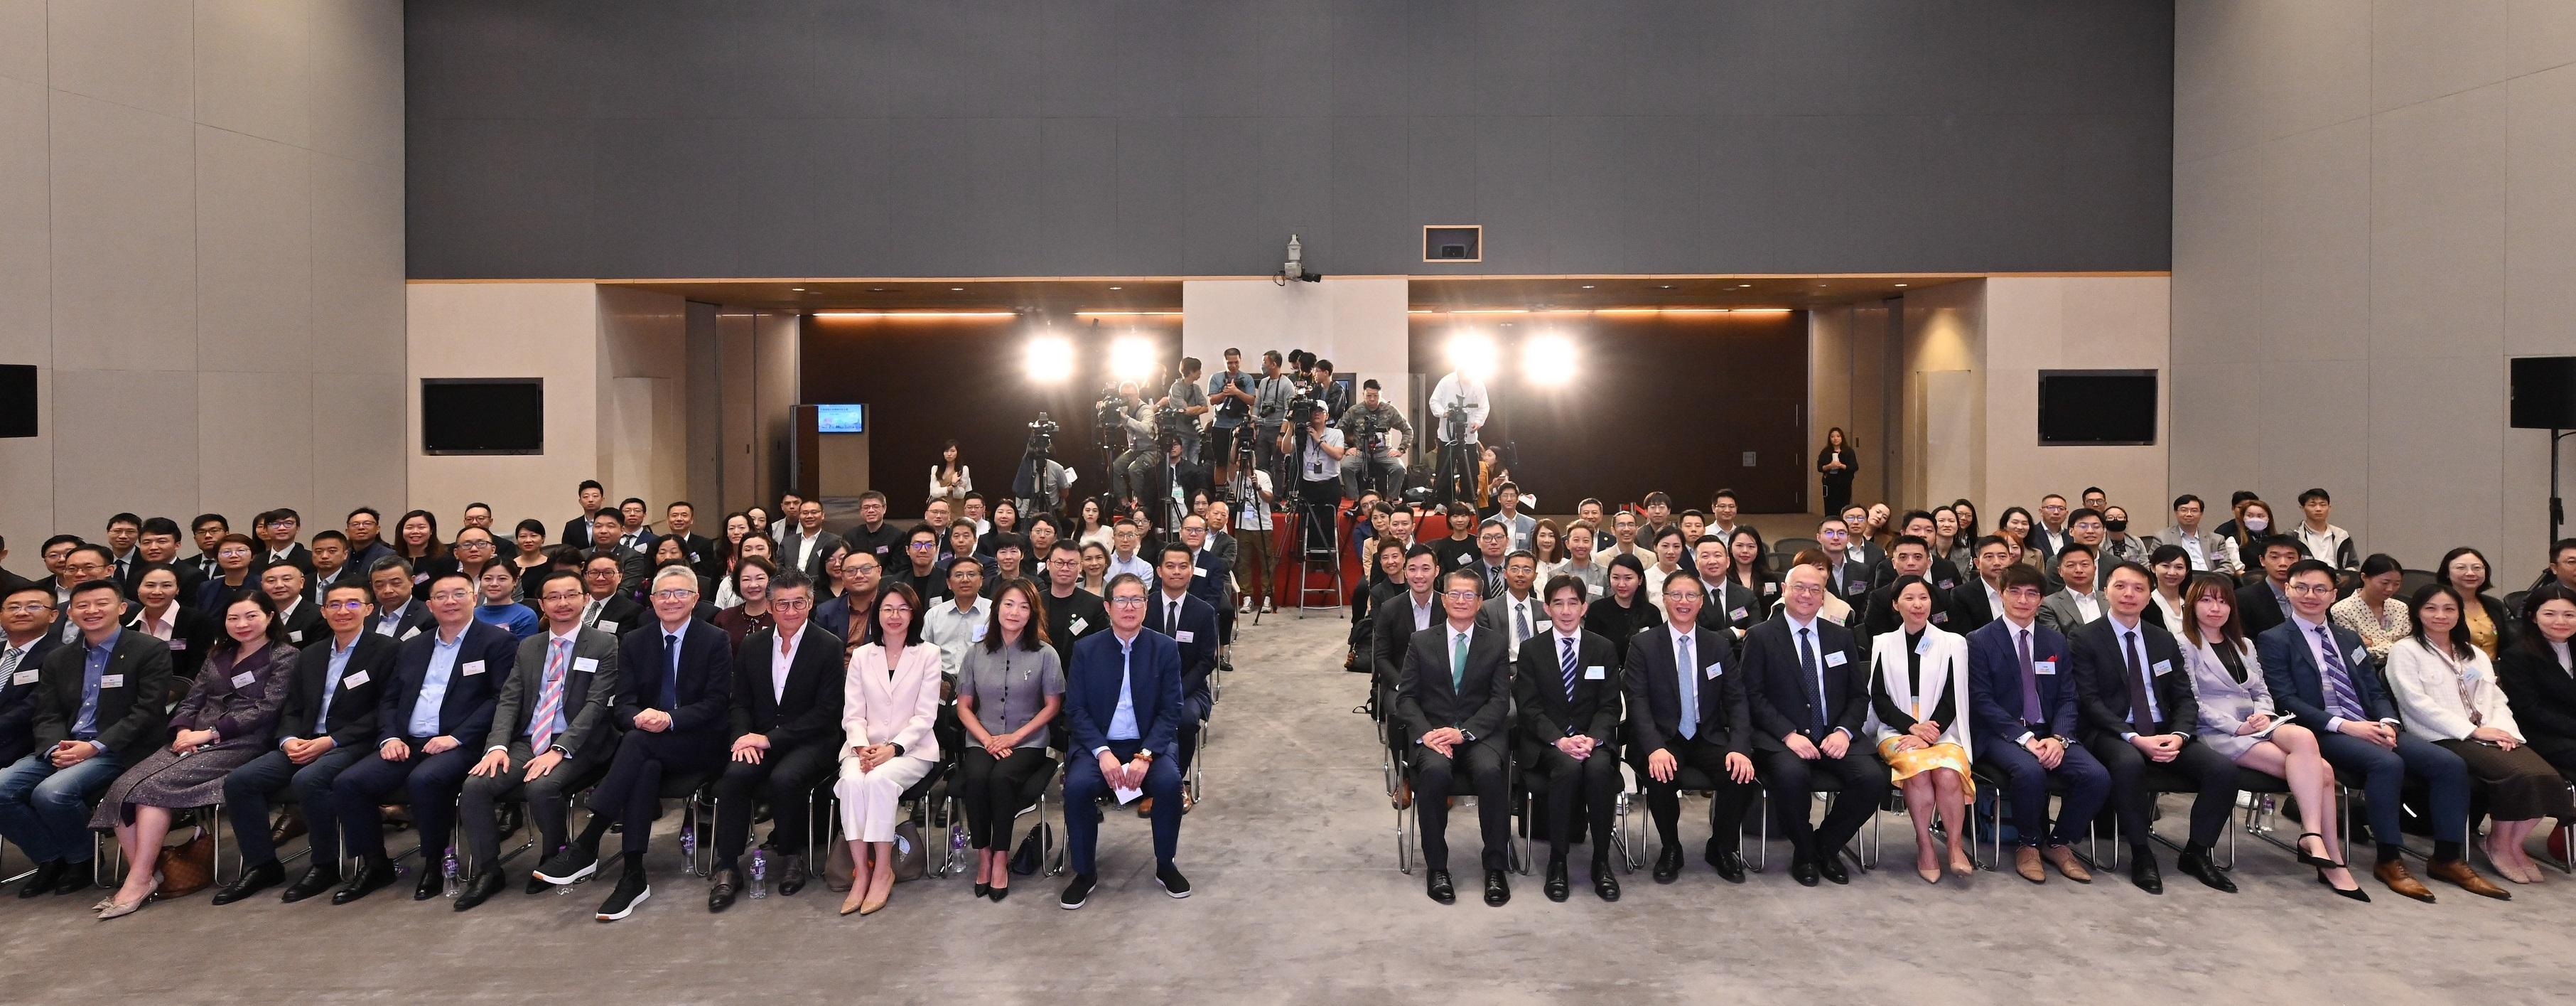 The Financial Secretary, Mr Paul Chan, attended the Plaques Unveiling Ceremony for the Establishment of AstraZeneca R&D Centre and iCampus in Hong Kong today (November 24). Photo shows Mr Chan (first row, 11th right); the Executive Vice President, International and China President of AstraZeneca, Mr Leon Wang (first row, 11th left); the Director-General of the Office for Attracting Strategic Enterprises, Mr Philip Yung (first row, 10th right), and other guests at the ceremony.